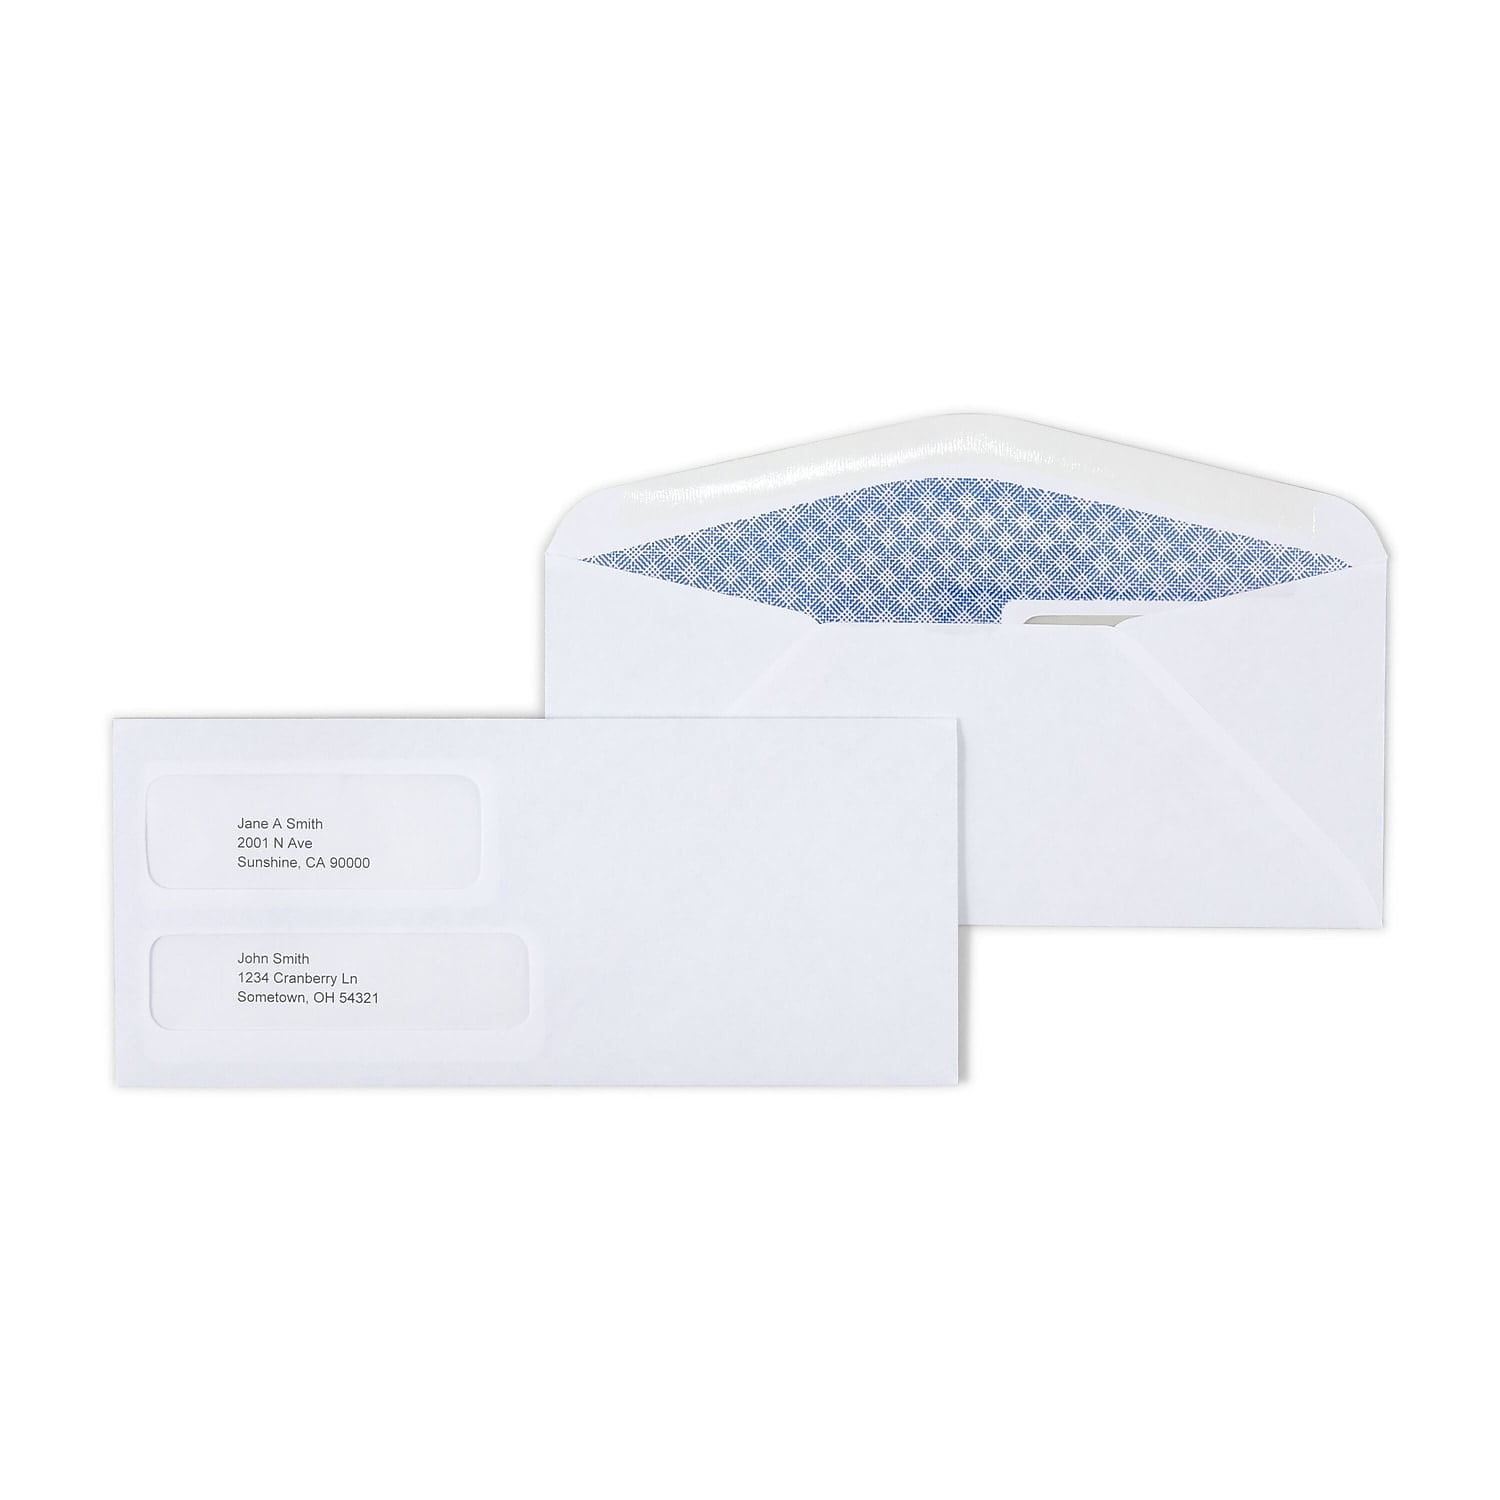 500 #10 Gummed Double Window Security Envelopes for Quickbooks Invoices 